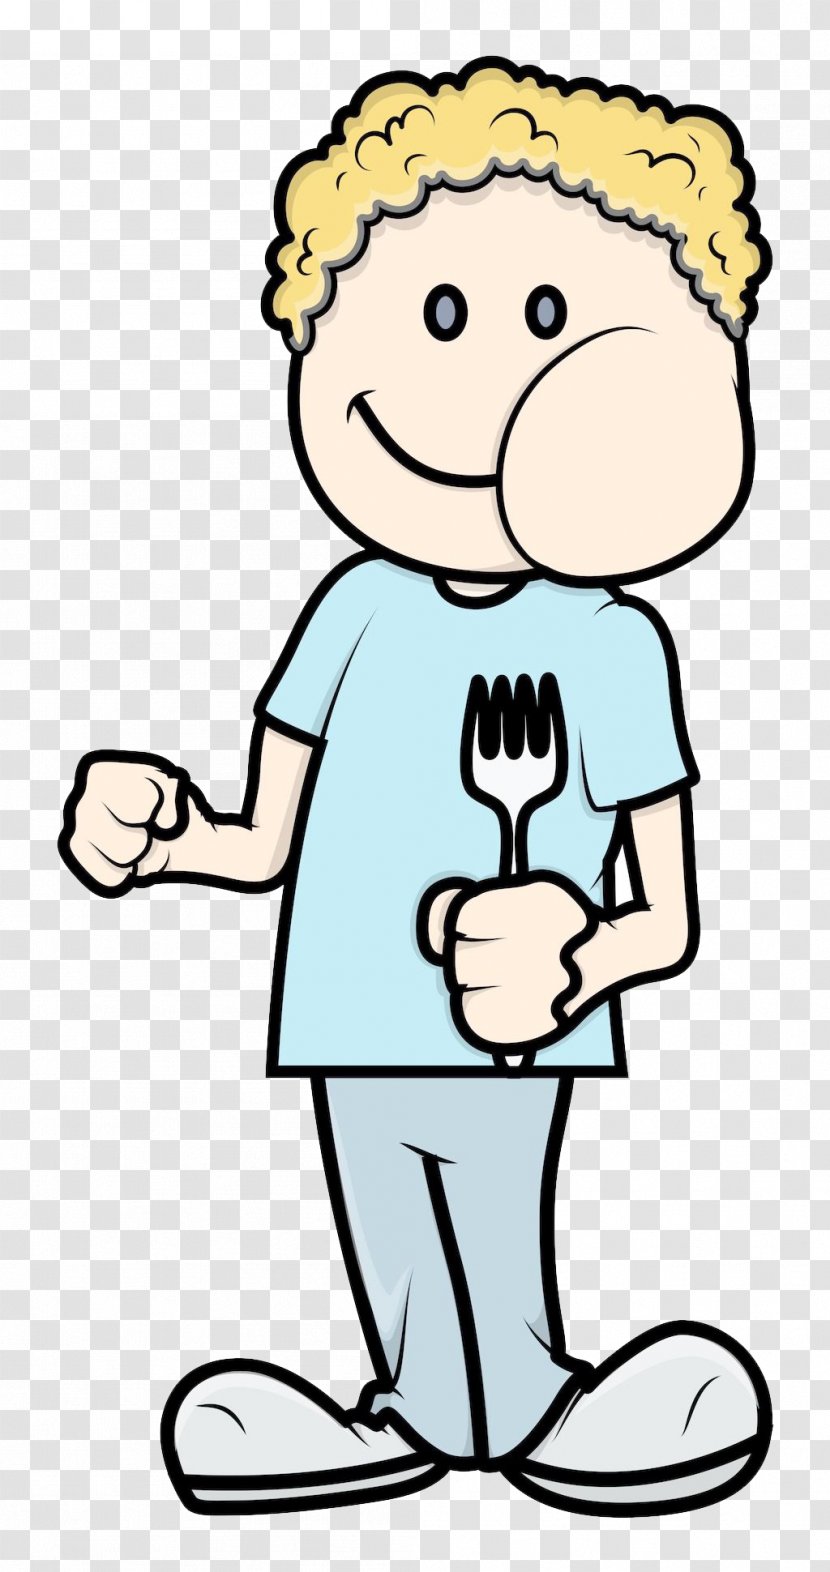 Birthday Cake Cartoon Eating Clip Art - Hand - The Man With Fork Transparent PNG